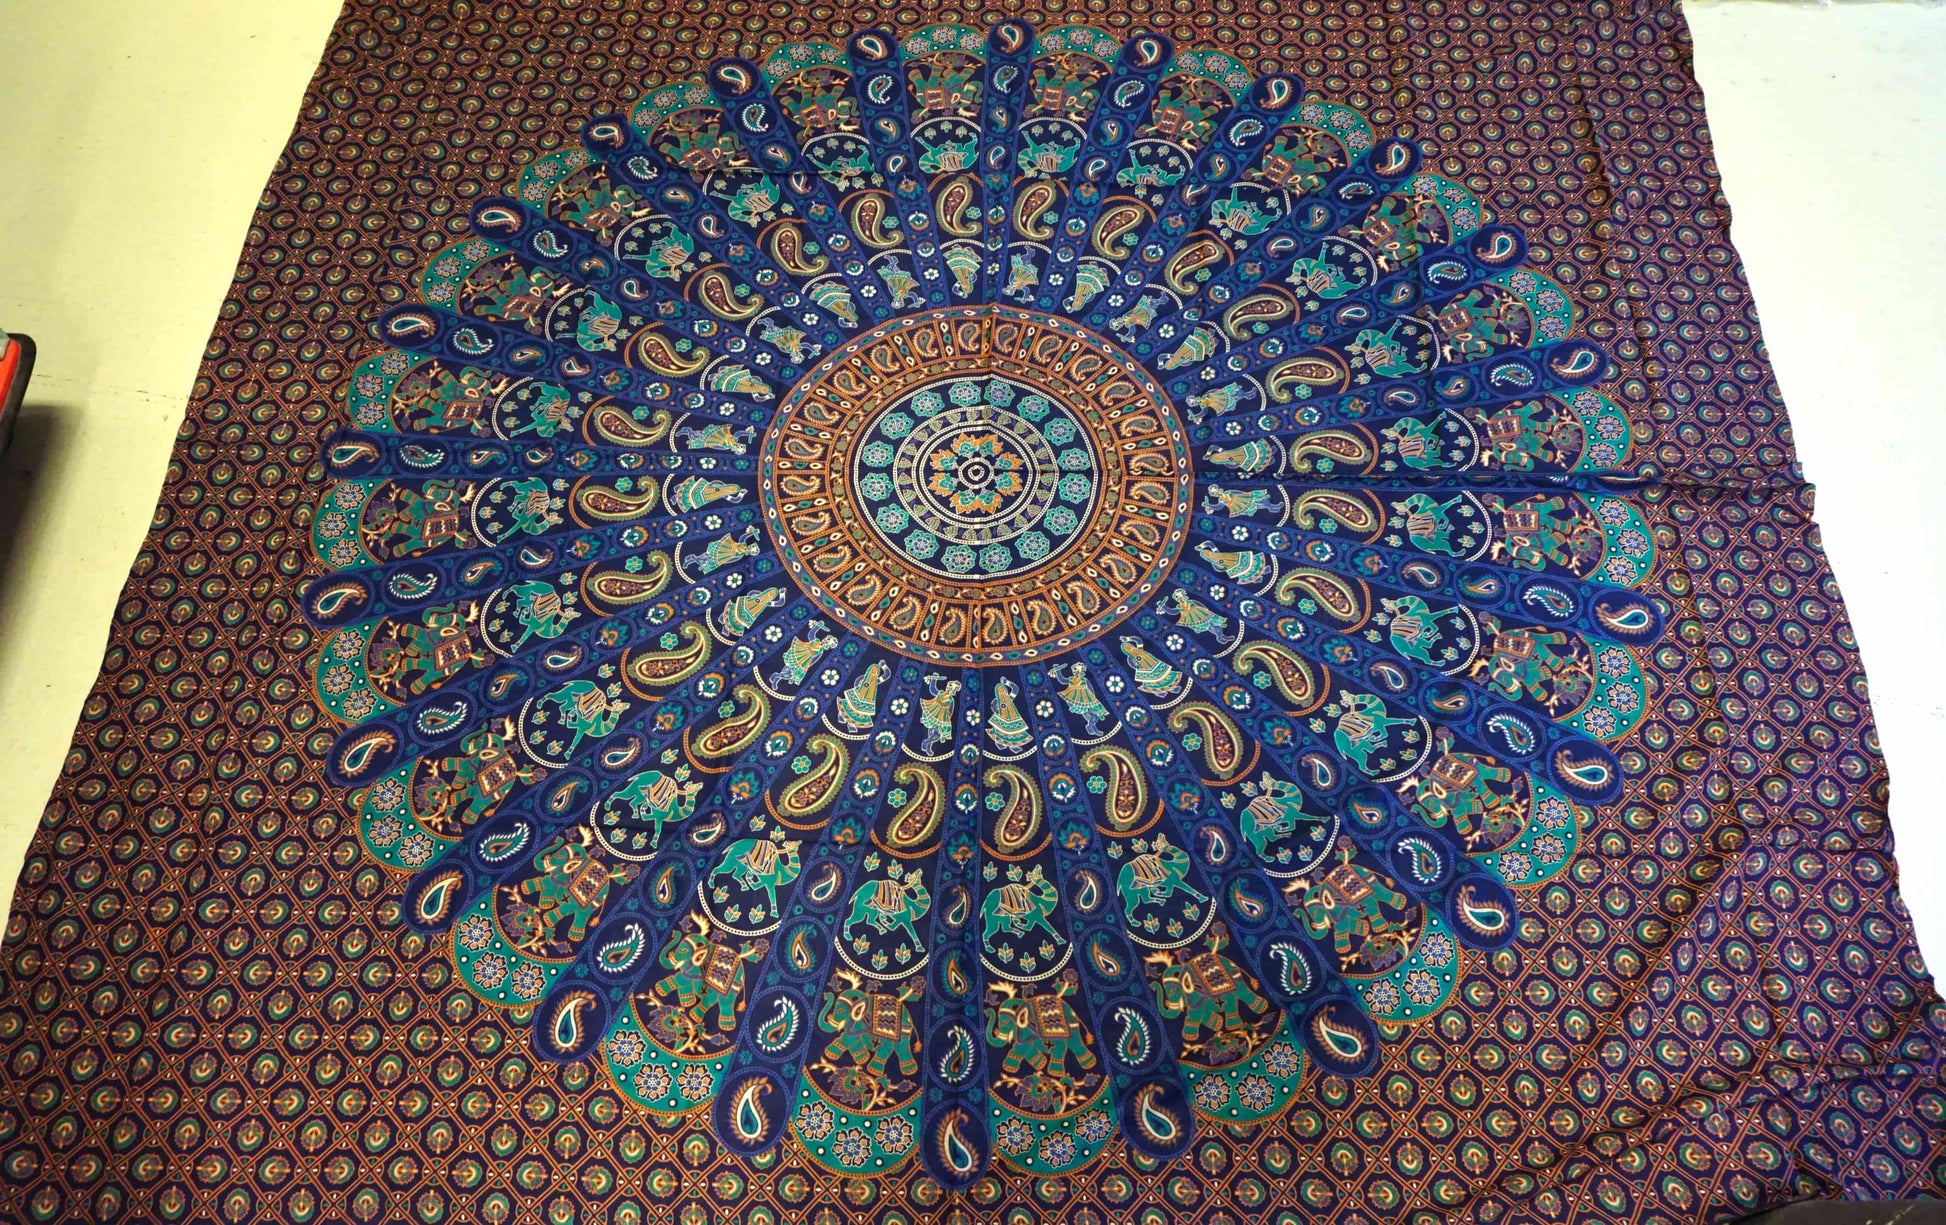 Mandala cover Wall hanging Cotton blue turquoise